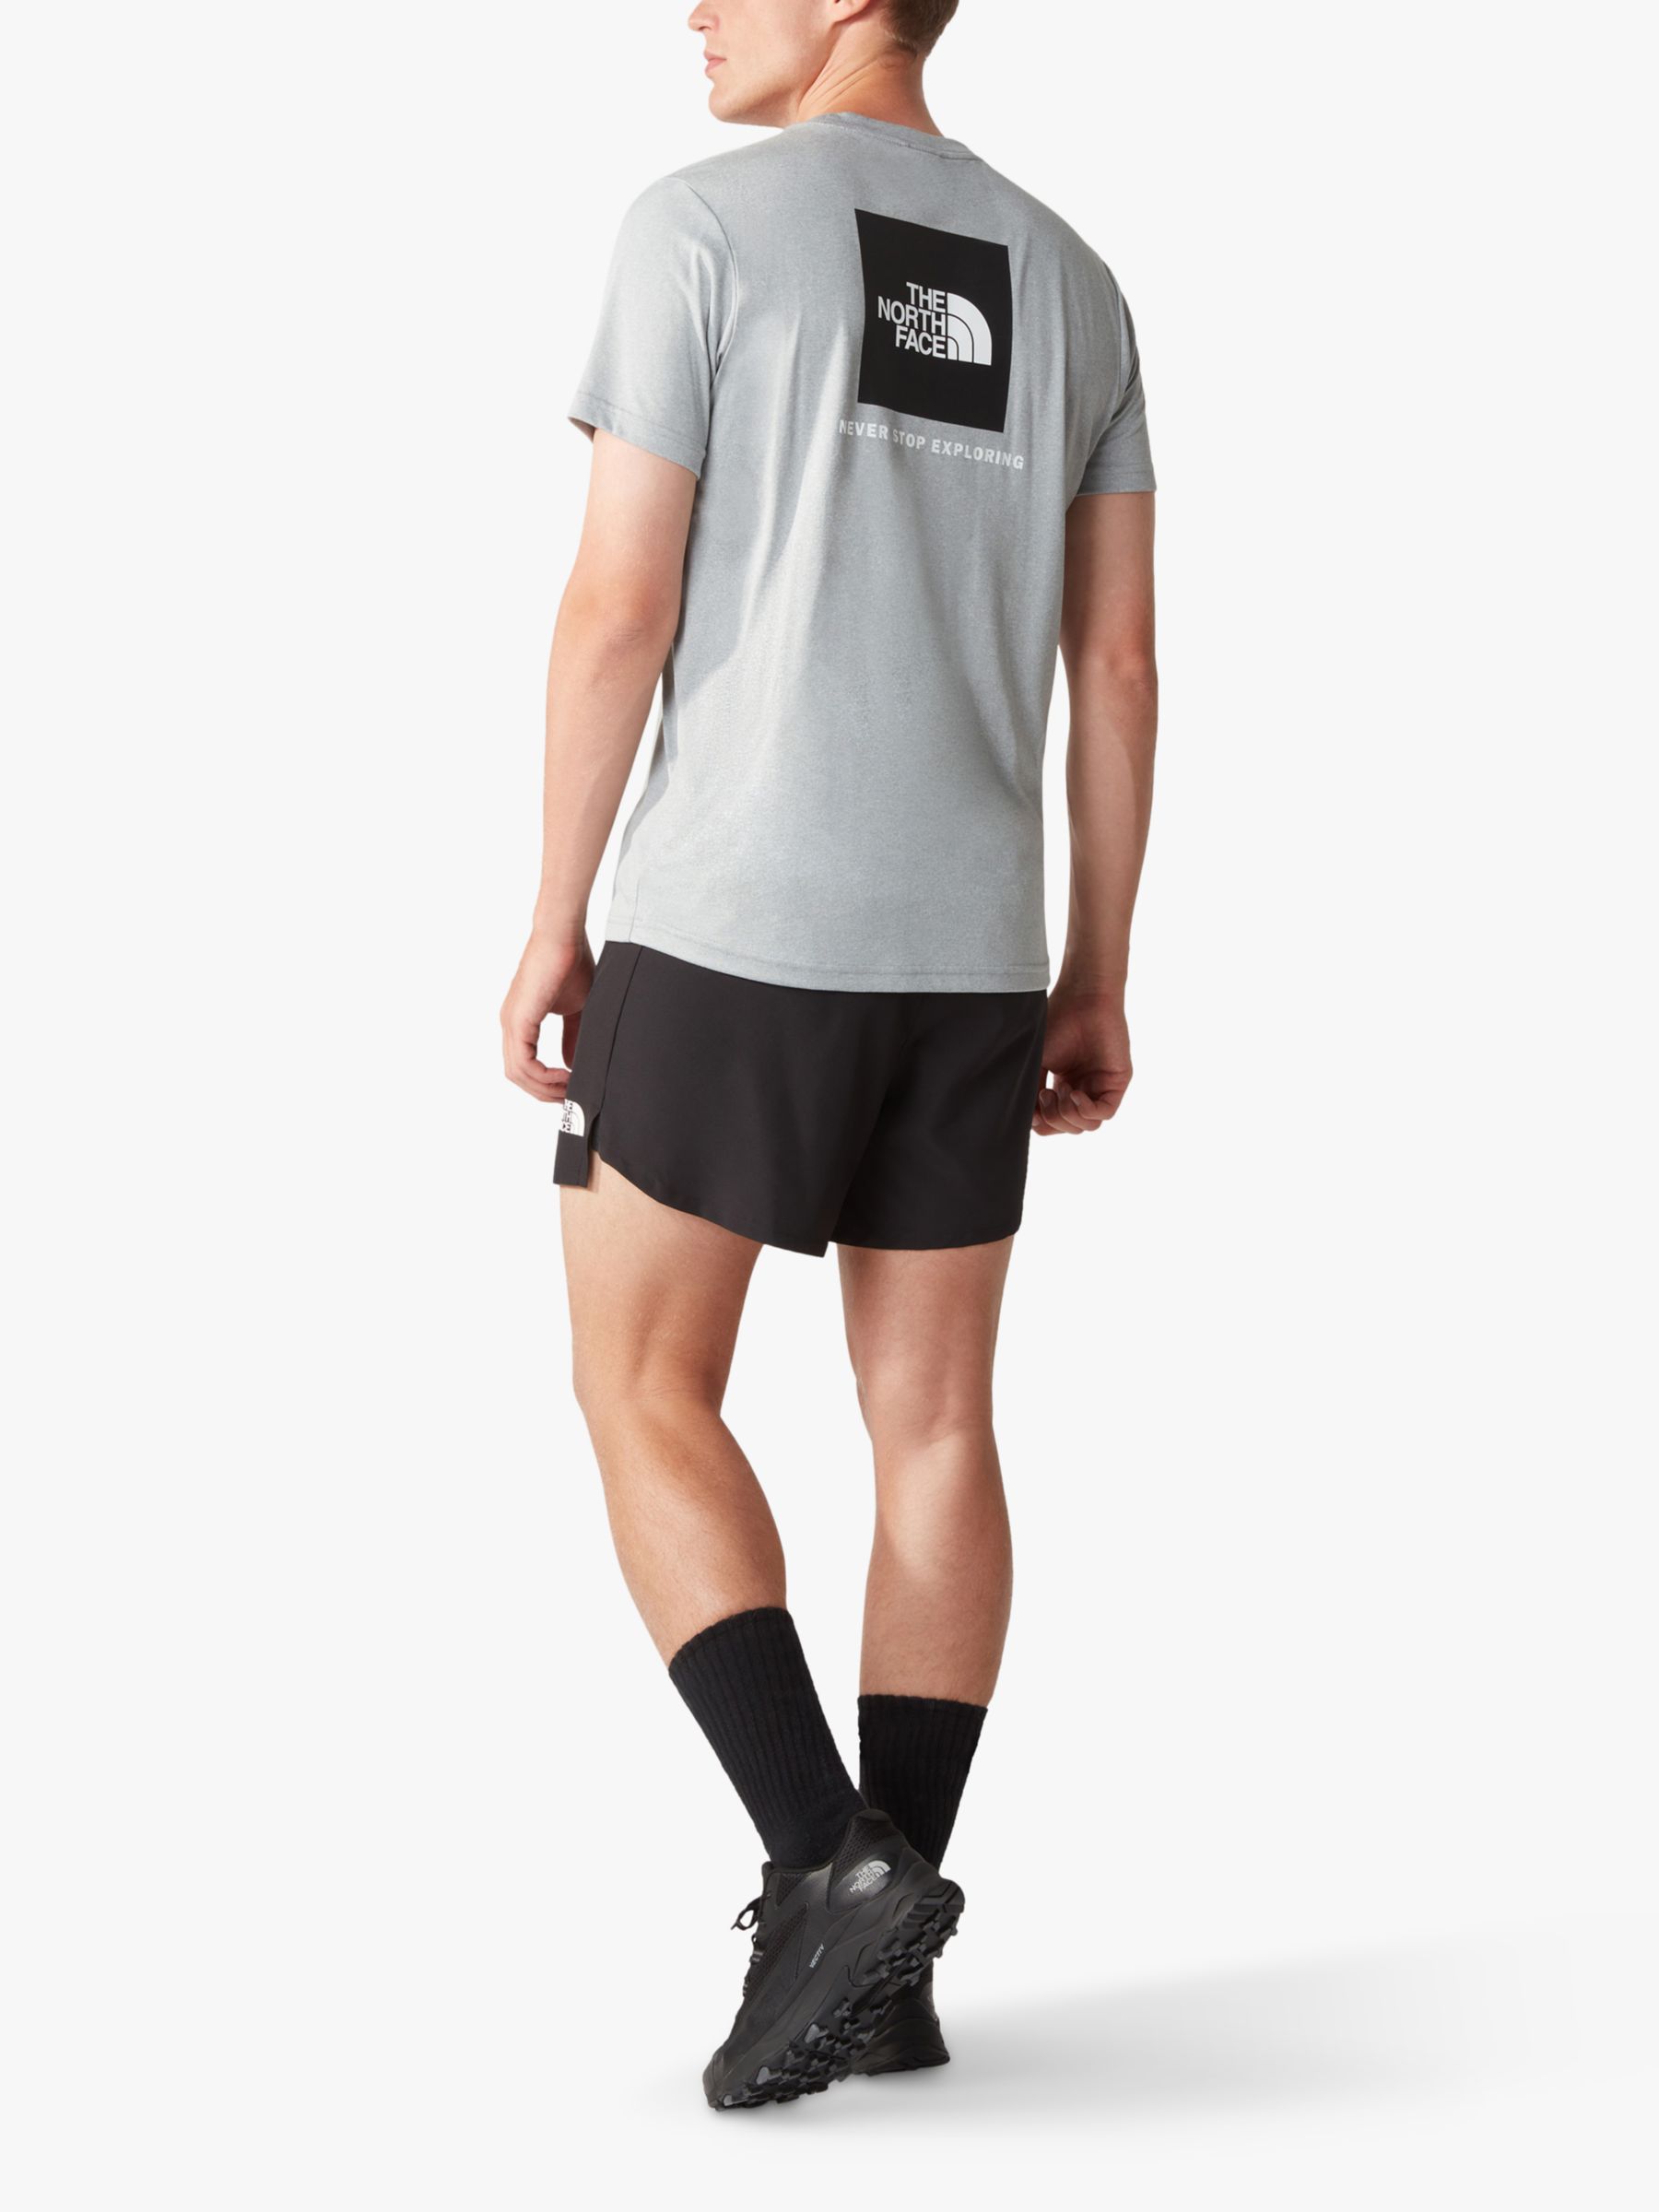 The North Face Reaxion Redbox T-Shirt, Grey Heather, S